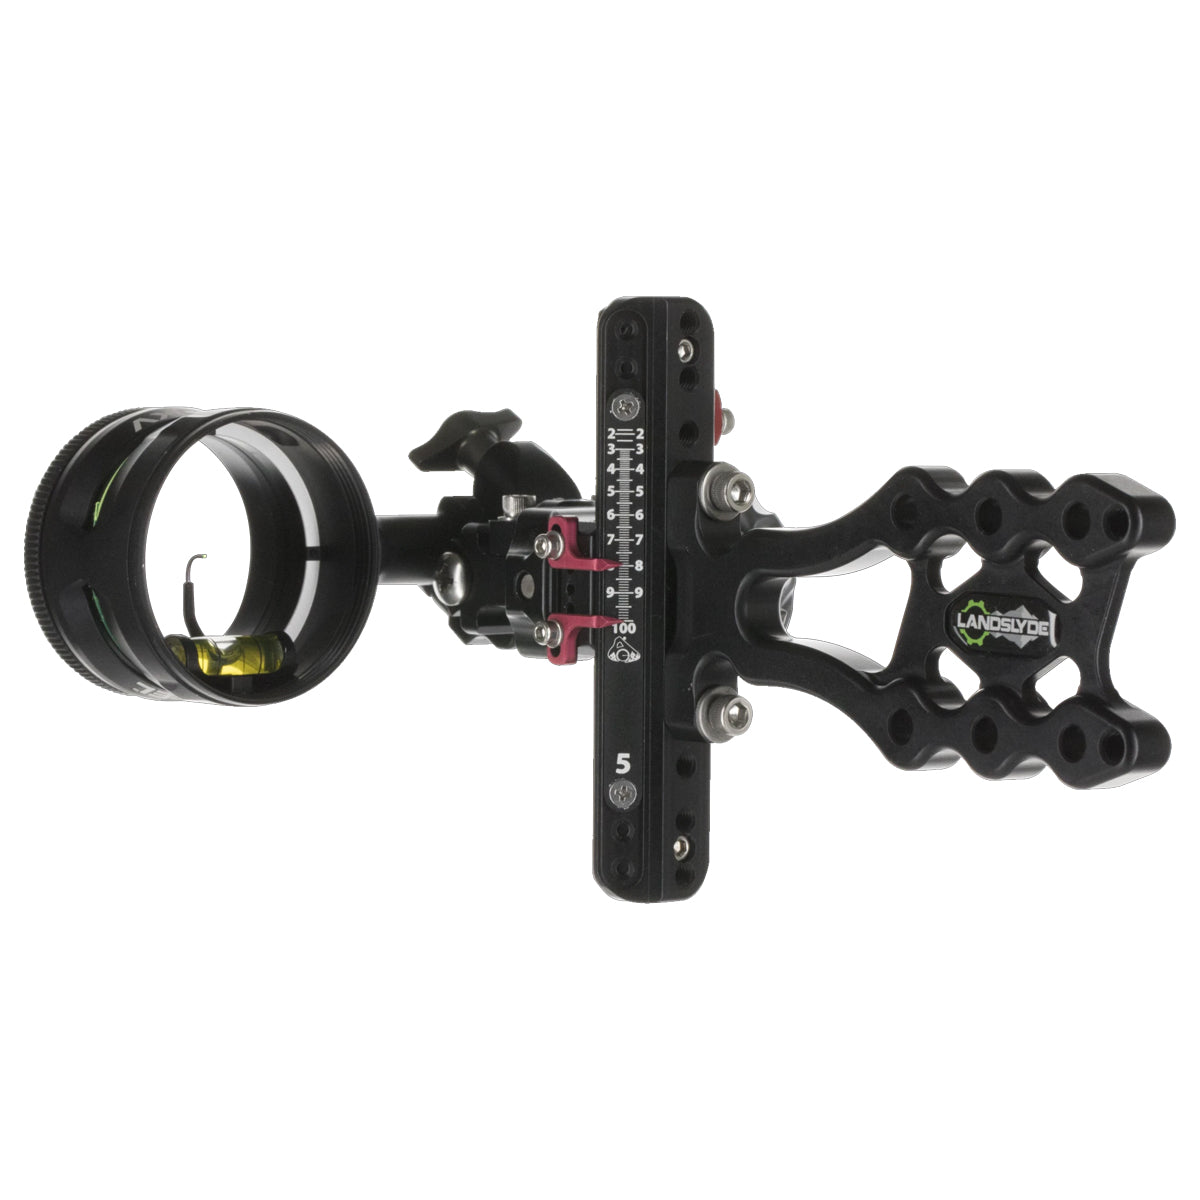 Axcel Landslyde Accustat II 3 Pin Bow Sight in  by GOHUNT | Axcel - GOHUNT Shop